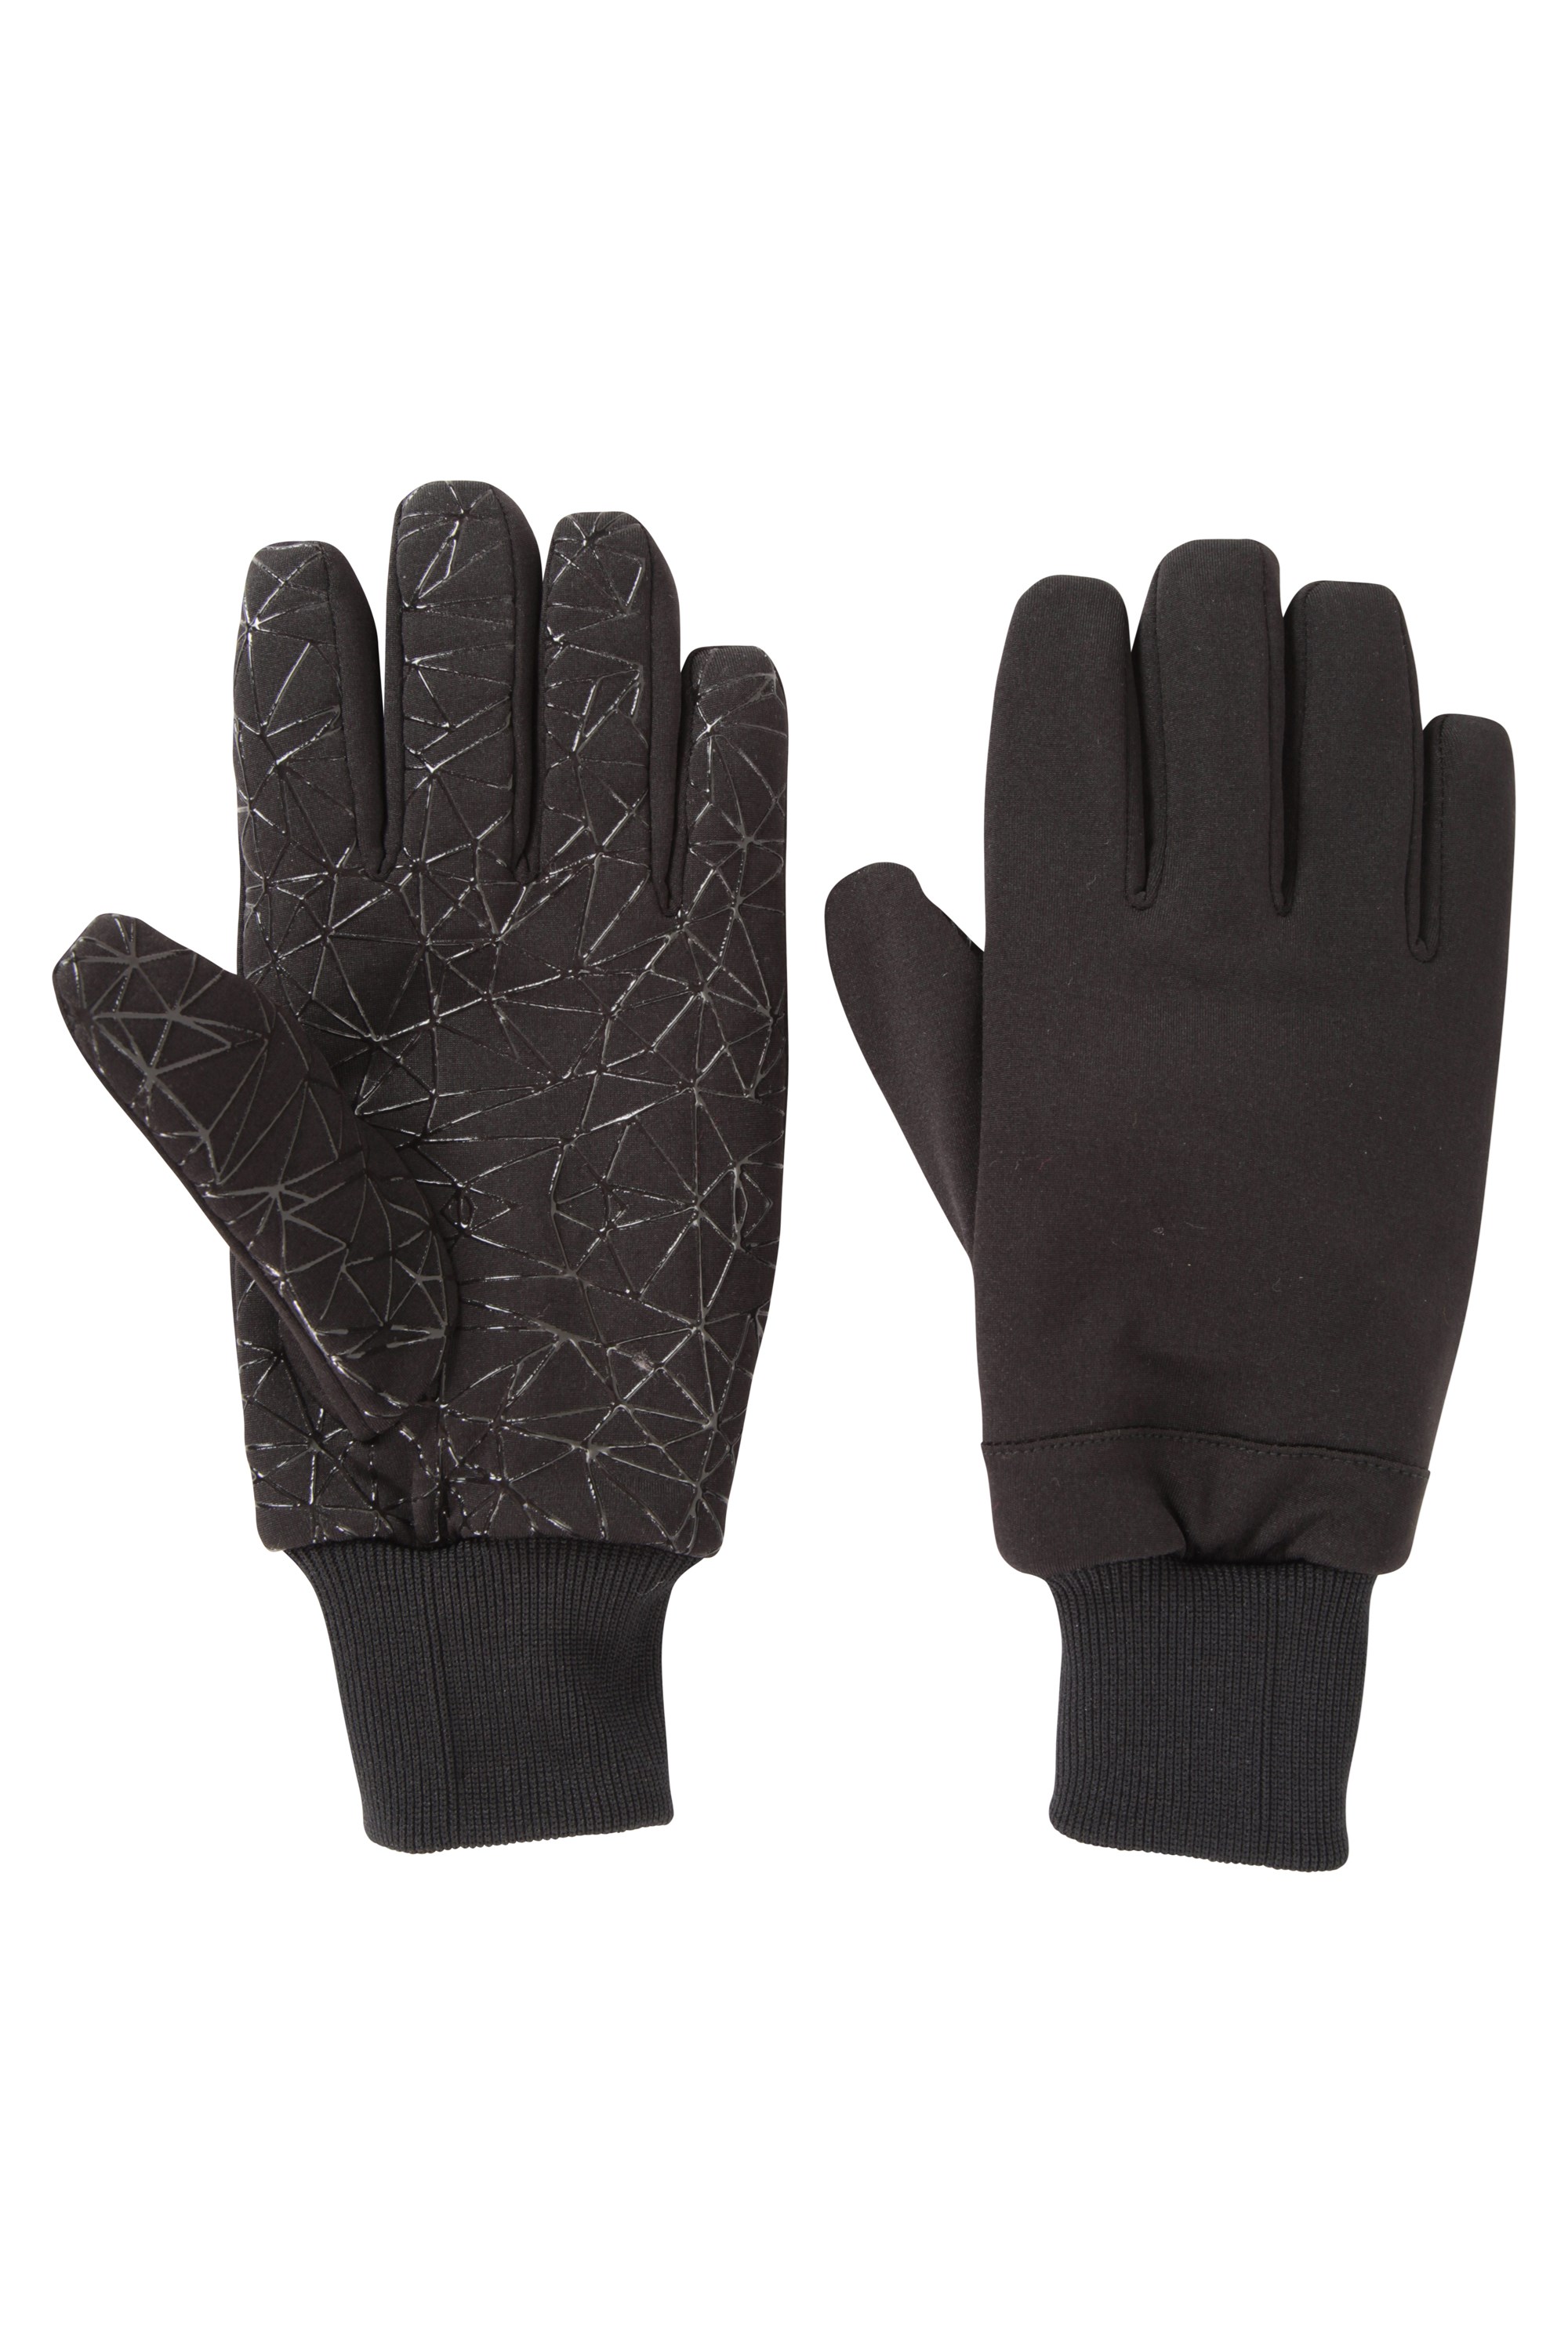 S/M/L/XL Mountain Warehouse Mens Waterproof Gloves Windproof and Breathable 